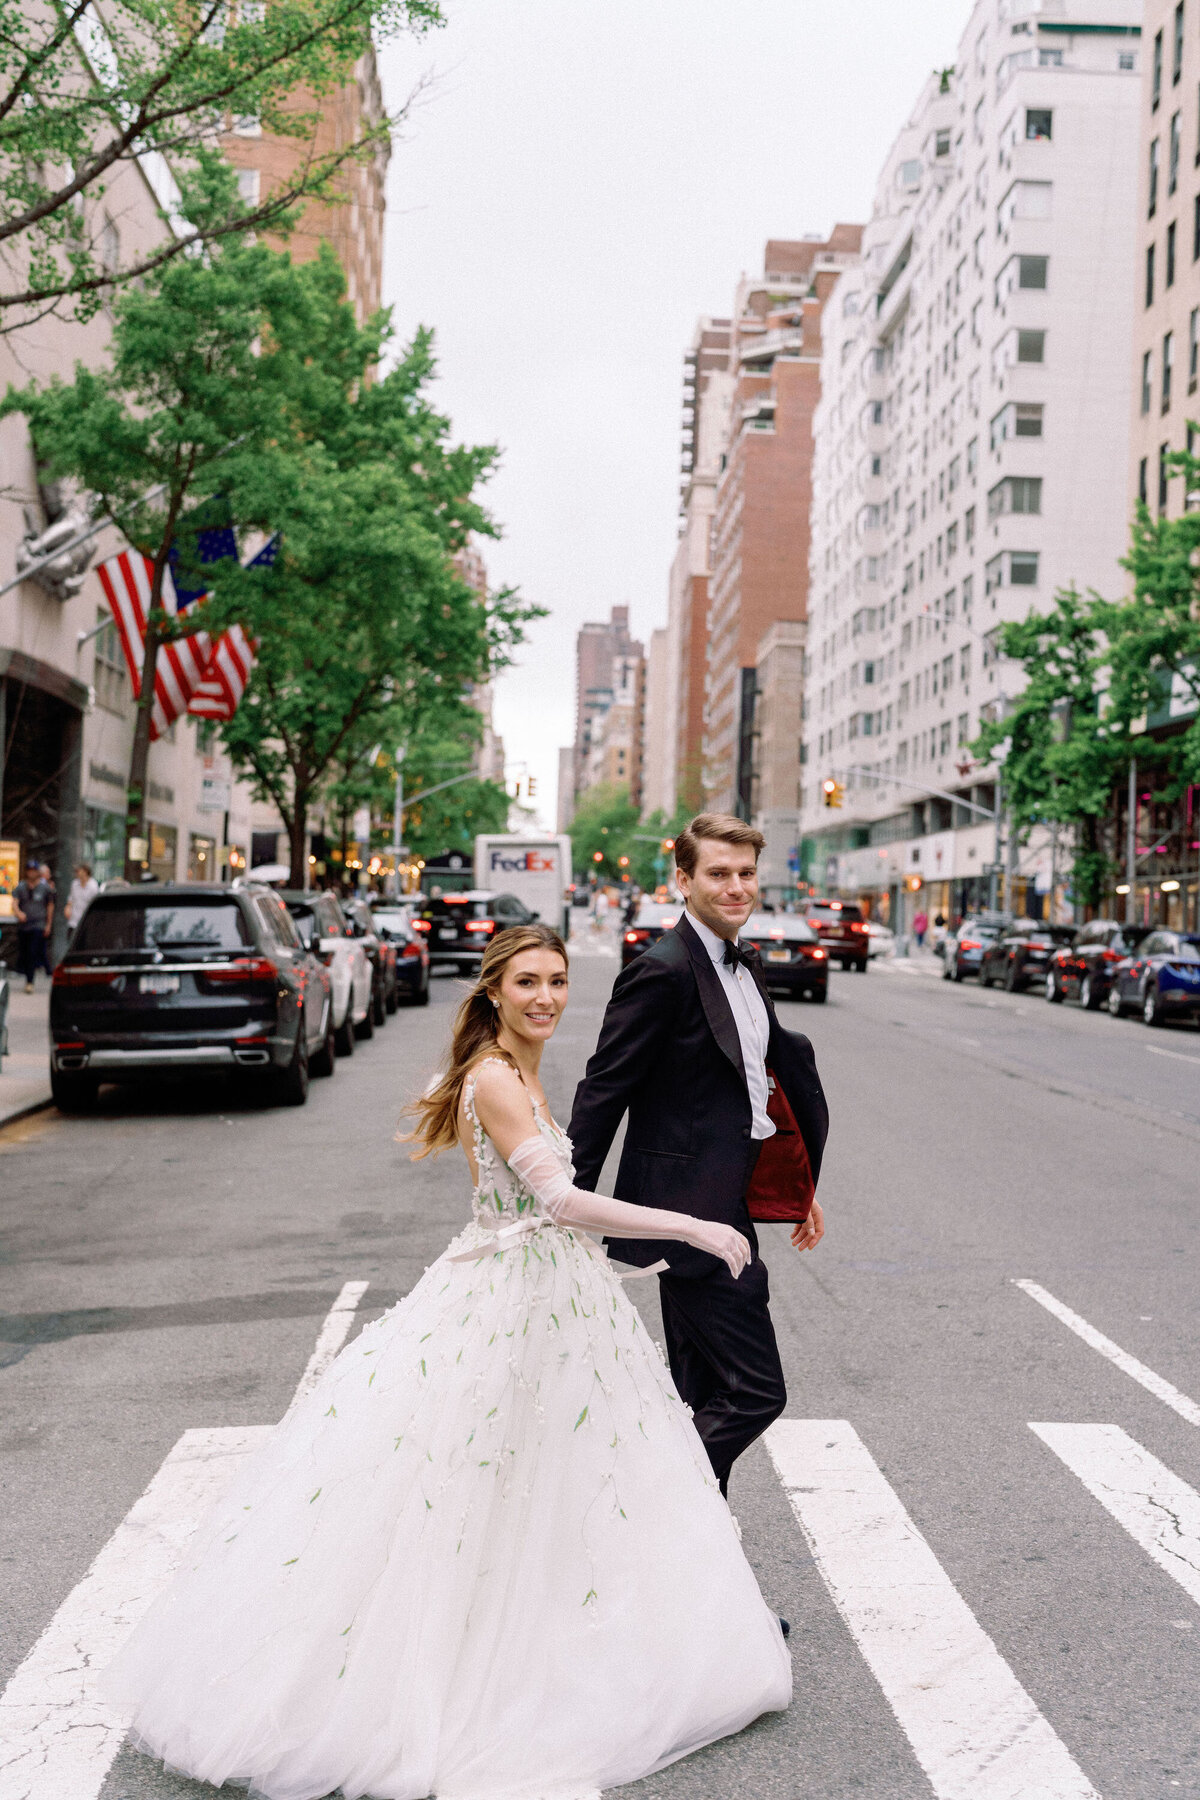 erica-renee-beauty-hair-and-makeup-duo-traveling-team-NYC-bride-street-shot-crosswalk-carlyle-hotel-NYC-over-the-moon-bride-couple-portrait-city-streets